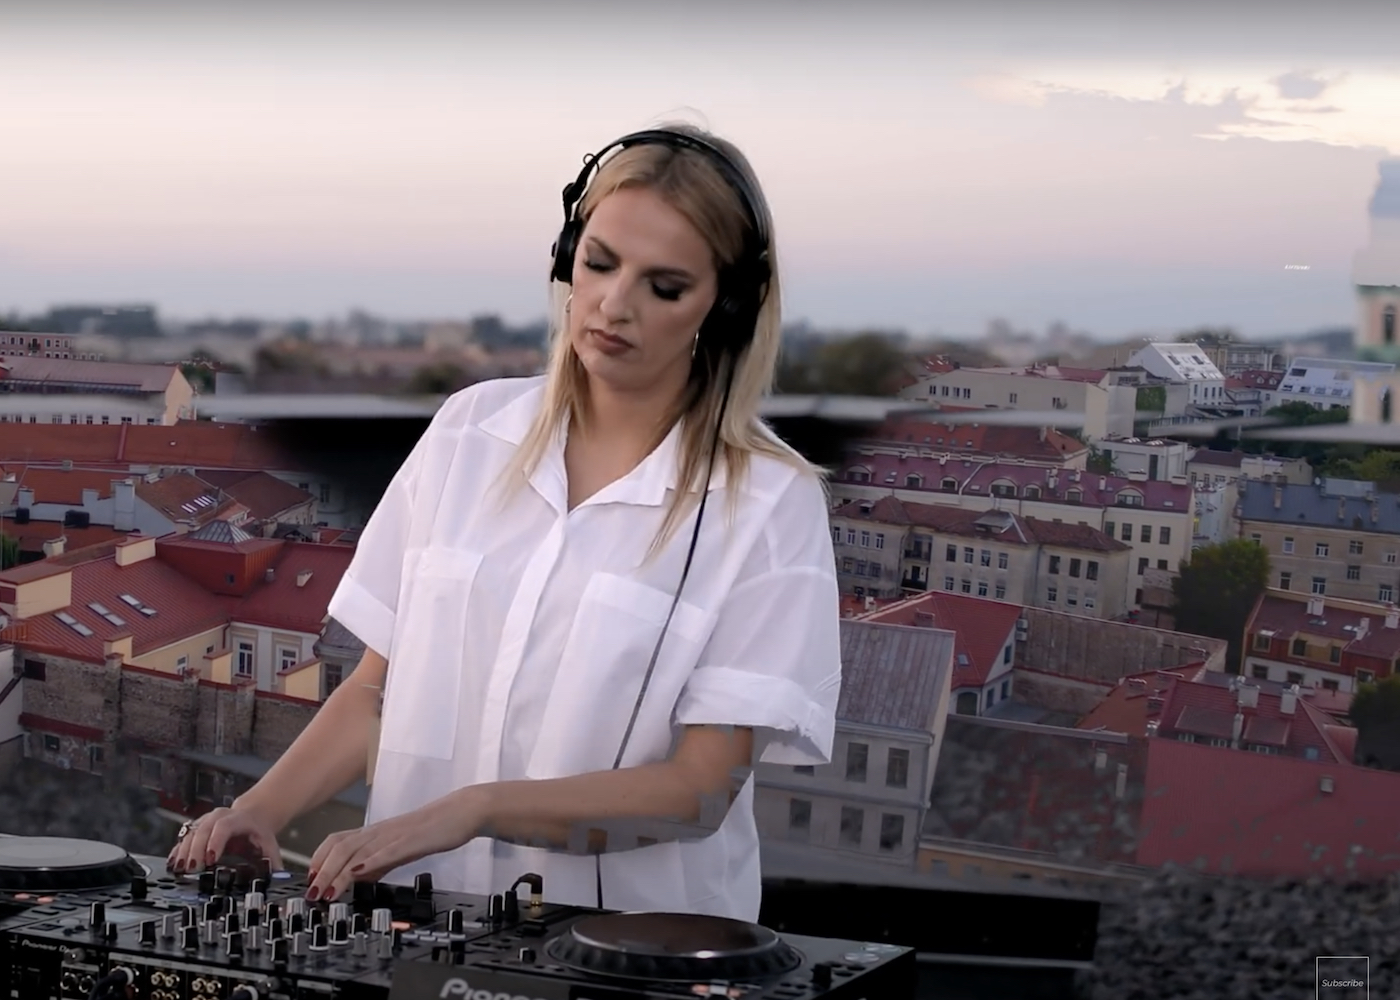 Listen to a one-hour techno set from the top of Chernobyl’s sister nuclear power plant